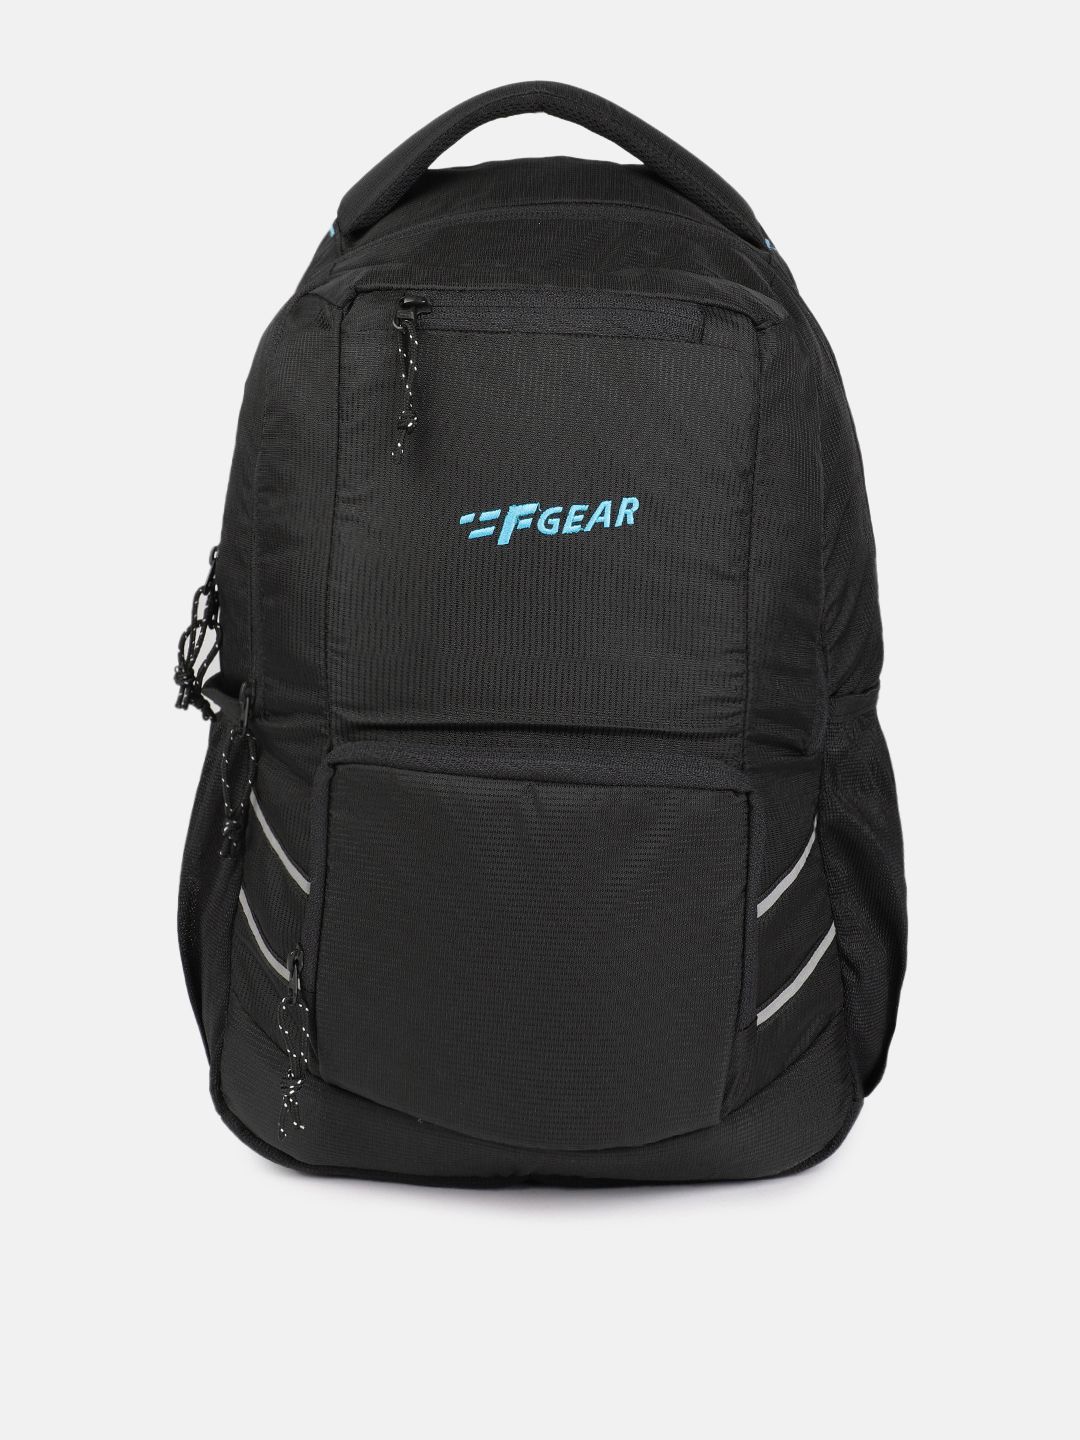 F Gear Unisex Black Brand Logo Intellect Doby Backpack Price in India